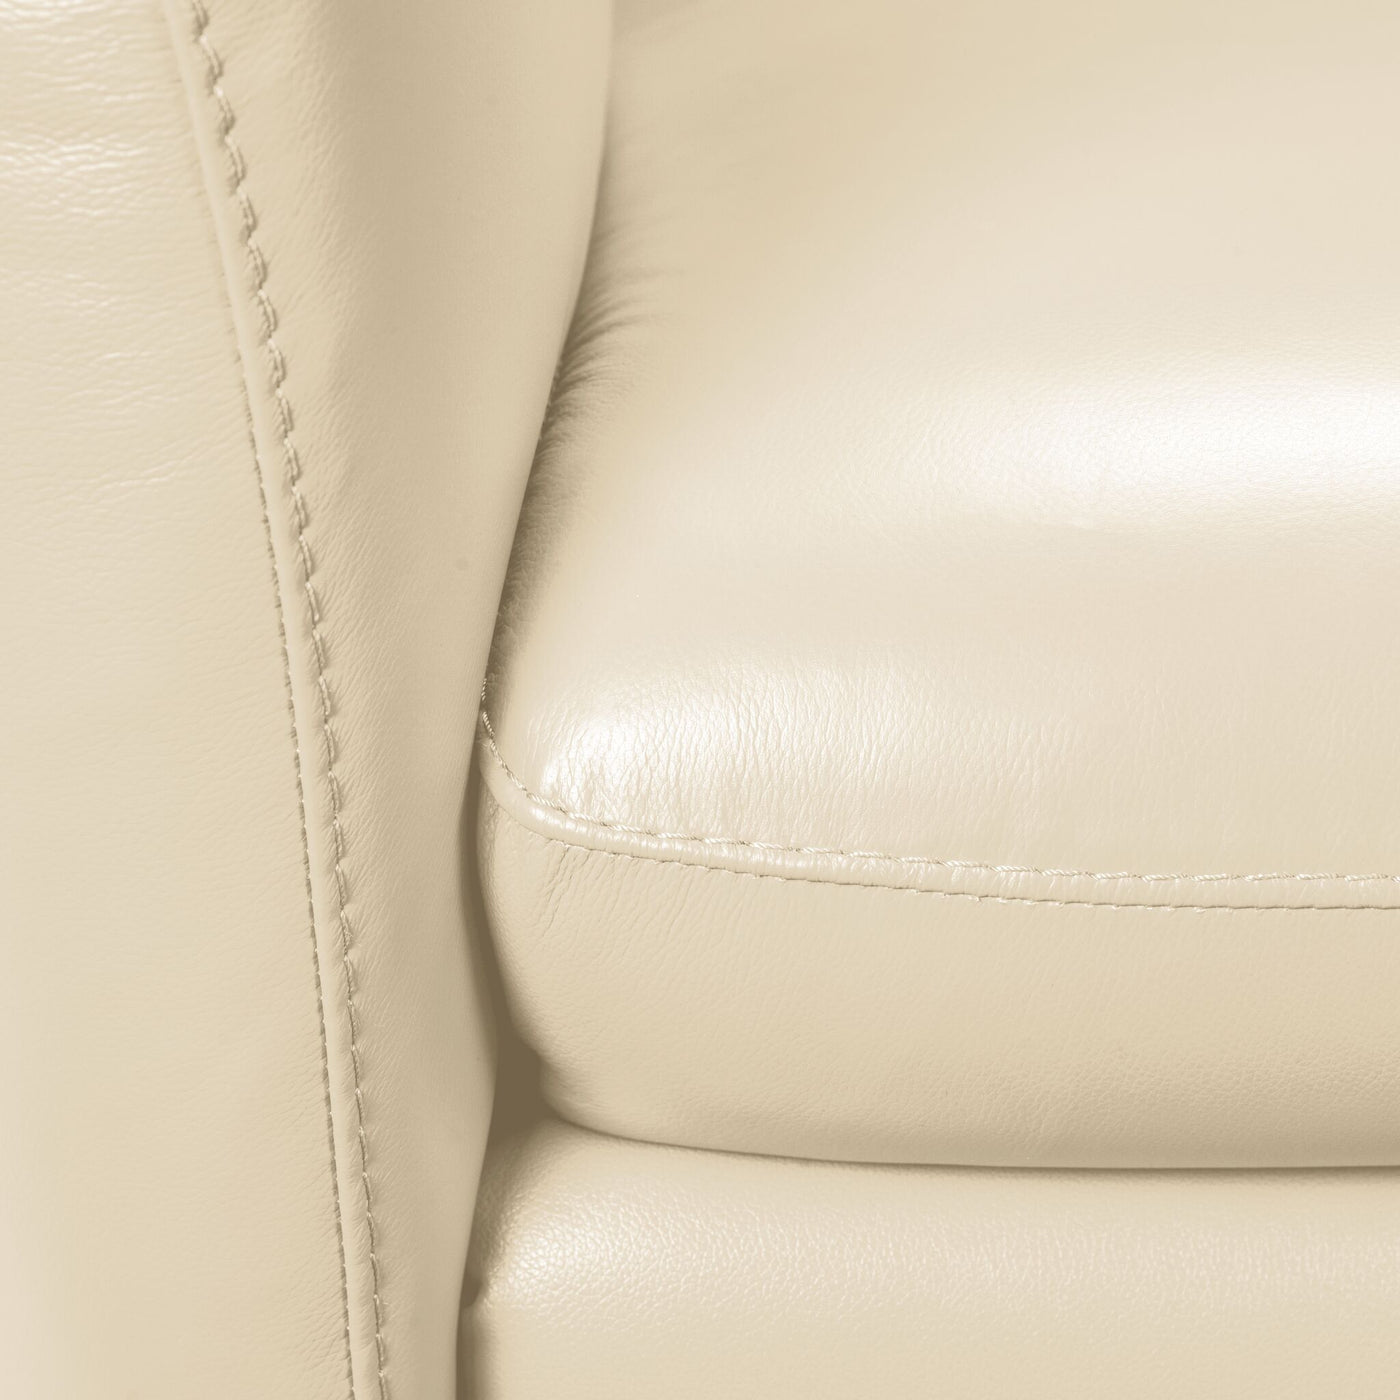 Carlino Leather Chair - Bisque